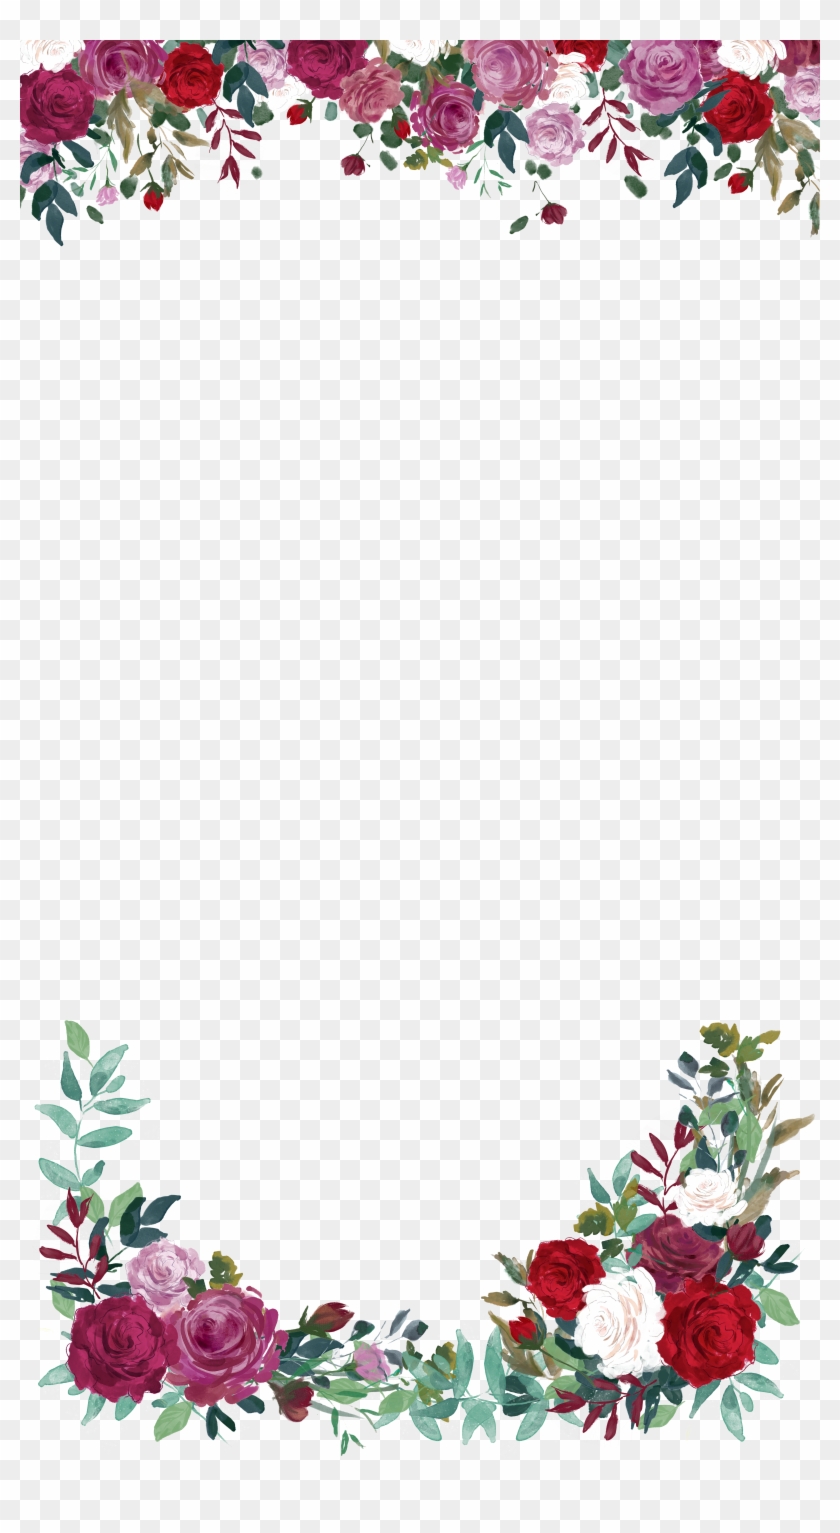 Snapchat Filters Clipart Rose - Garden Roses - Png Download #297072